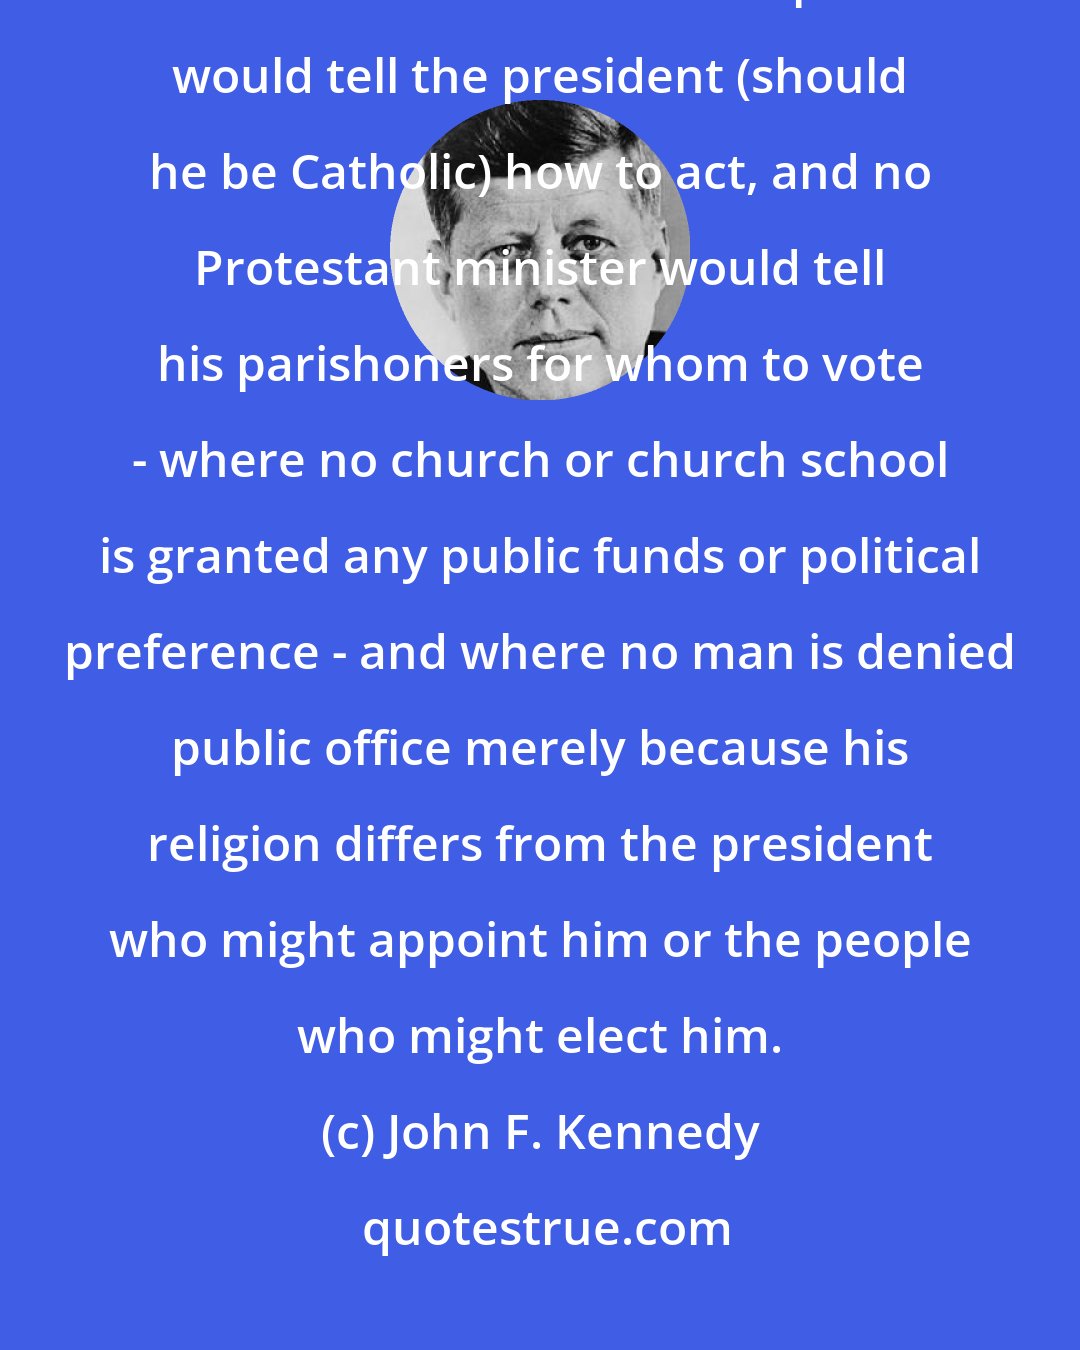 John F. Kennedy: I believe in an America where the separation of church and state is absolute - where no Catholic prelate would tell the president (should he be Catholic) how to act, and no Protestant minister would tell his parishoners for whom to vote - where no church or church school is granted any public funds or political preference - and where no man is denied public office merely because his religion differs from the president who might appoint him or the people who might elect him.